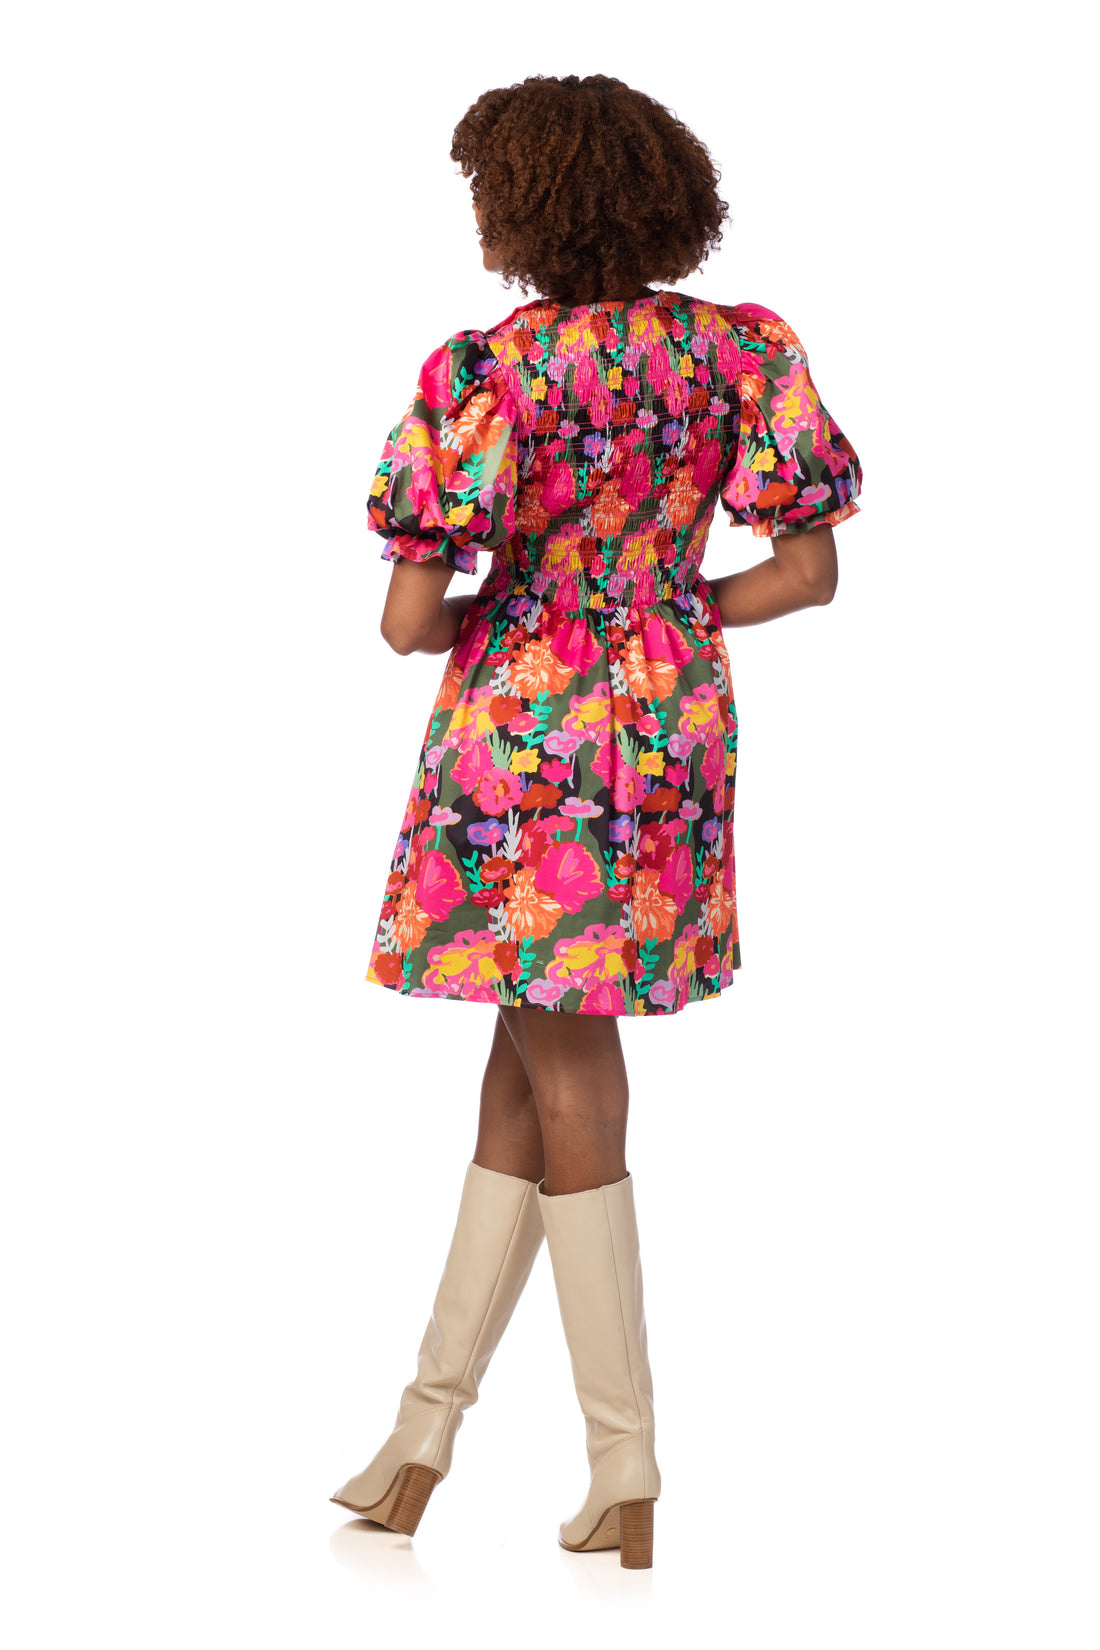 Crosby By Mollie Burch Lizzy Dress Floral Forest